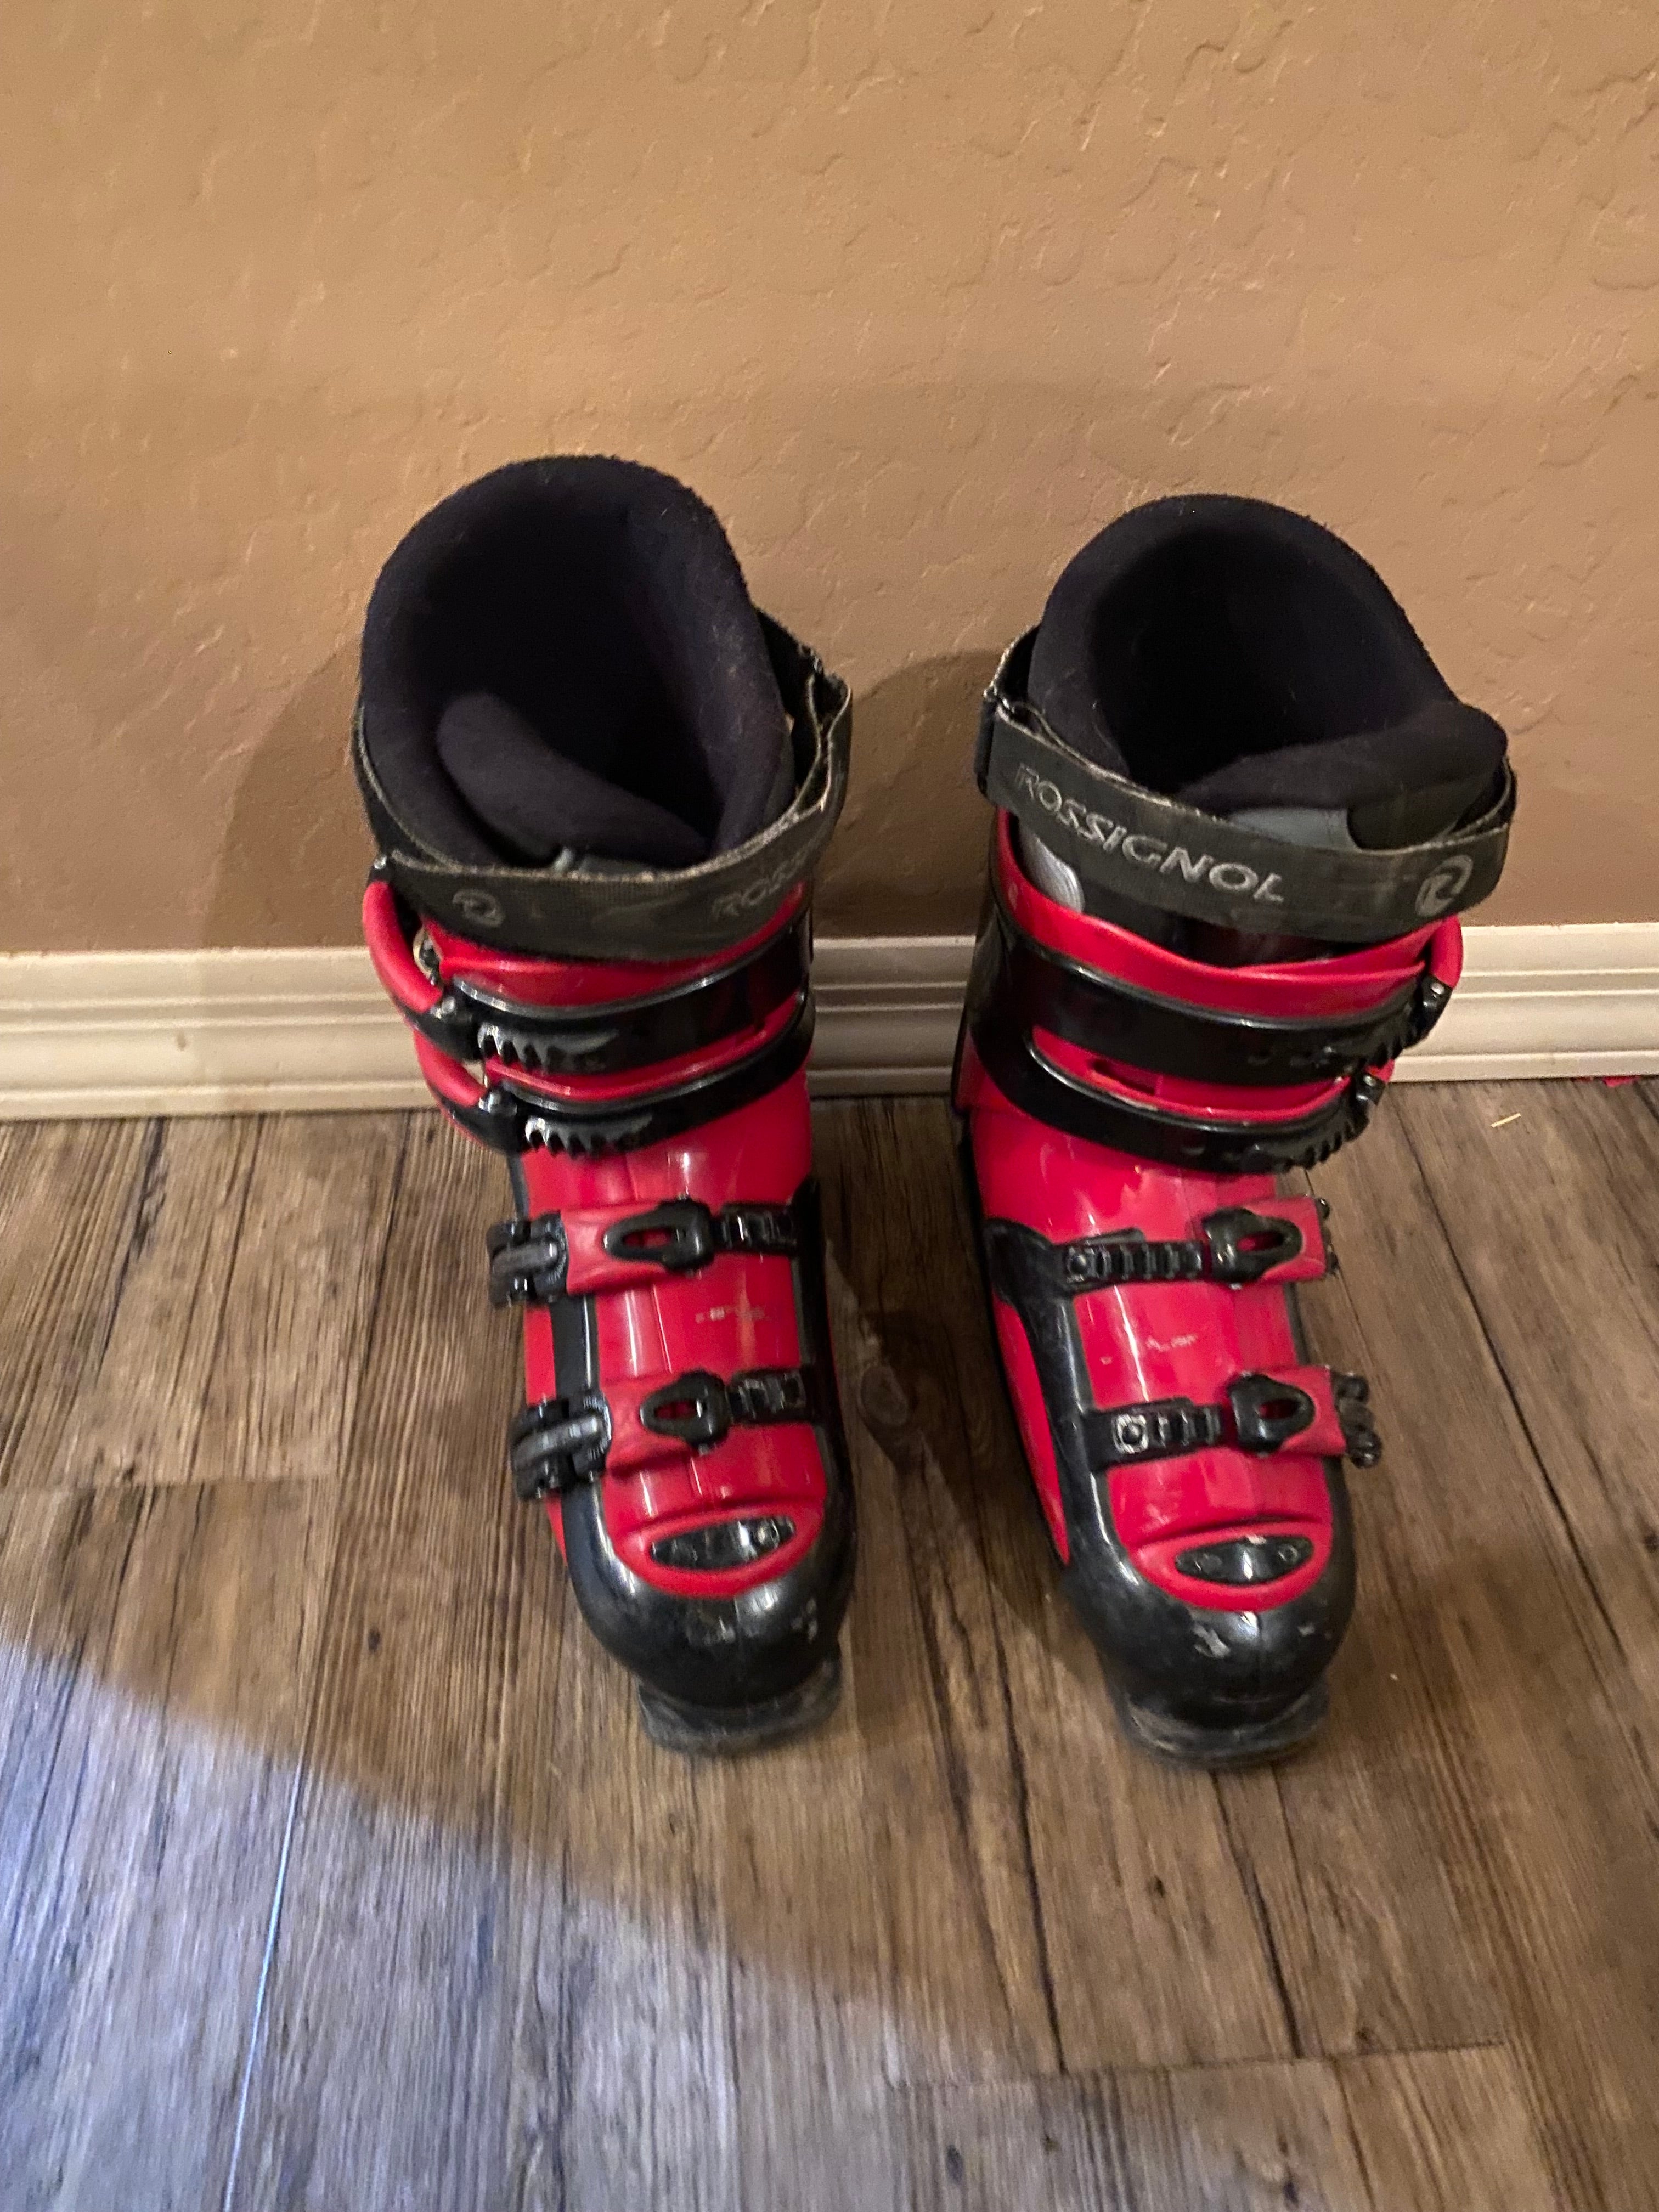 Tecnica Innotec TI 6.1 ski boots Size 23. - sporting goods - by owner -  sale - craigslist